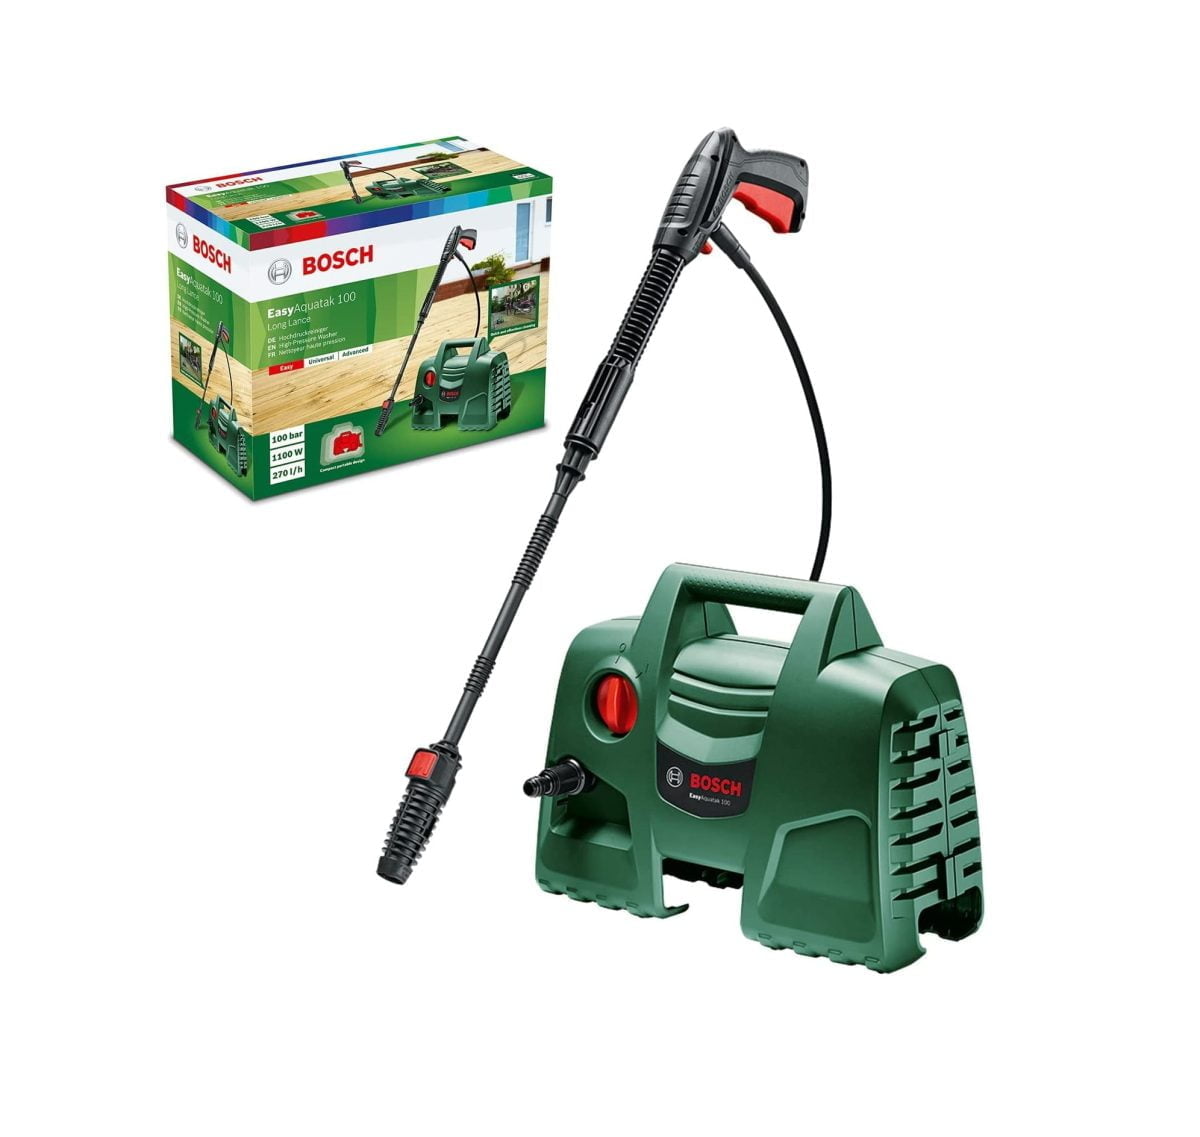 71Dgarxvvul. Ac Sl1500 Bosch &Lt;H1 Class=&Quot;Product-Title&Quot;&Gt;Bosch Easyaquatak 100 Long Lance Pressure Washer (1200 W) 100 Bar&Lt;/H1&Gt; &Lt;Div Class=&Quot;Col-Sm-6 Col-Md-12&Quot;&Gt; &Lt;Div Class=&Quot;O-Pthg-Productstage__Product-Summary H6&Quot;&Gt; &Lt;Div Class=&Quot;O-Pthg-Productstage__Product-Summary H6&Quot;&Gt;Compact And Quick For Effortless Cleaning Performance&Lt;/Div&Gt; &Lt;Ul Class=&Quot;A-List A-List--Unordered&Quot;&Gt; &Lt;Li Class=&Quot;A-List__Item&Quot;&Gt; &Lt;Div Class=&Quot;A-Text-Richtext&Quot;&Gt;Compact Design Allows Easy Maneuverability For Quick Cleaning Job&Lt;/Div&Gt;&Lt;/Li&Gt; &Lt;Li Class=&Quot;A-List__Item&Quot;&Gt; &Lt;Div Class=&Quot;A-Text-Richtext&Quot;&Gt;Adjustable Nozzle – From A Forceful Jet To Gentle Rinsing&Lt;/Div&Gt;&Lt;/Li&Gt; &Lt;Li Class=&Quot;A-List__Item&Quot;&Gt; &Lt;Div Class=&Quot;A-Text-Richtext&Quot;&Gt;Push-Fit Connections For Ultimate Convenience&Lt;/Div&Gt;&Lt;/Li&Gt; &Lt;Li Class=&Quot;A-List__Item&Quot;&Gt; &Lt;Div Class=&Quot;A-Text-Richtext&Quot;&Gt;Easily Tackle Small-To-Medium-Sized Cleaning Tasks&Lt;/Div&Gt;&Lt;/Li&Gt; &Lt;/Ul&Gt; Model 00600 8A7 E71 Is &Lt;/Div&Gt; &Lt;/Div&Gt; Bosch Easyaquatak 100 Bosch Easyaquatak 100 Long Lance Pressure Washer (1200 W) 100 Bar